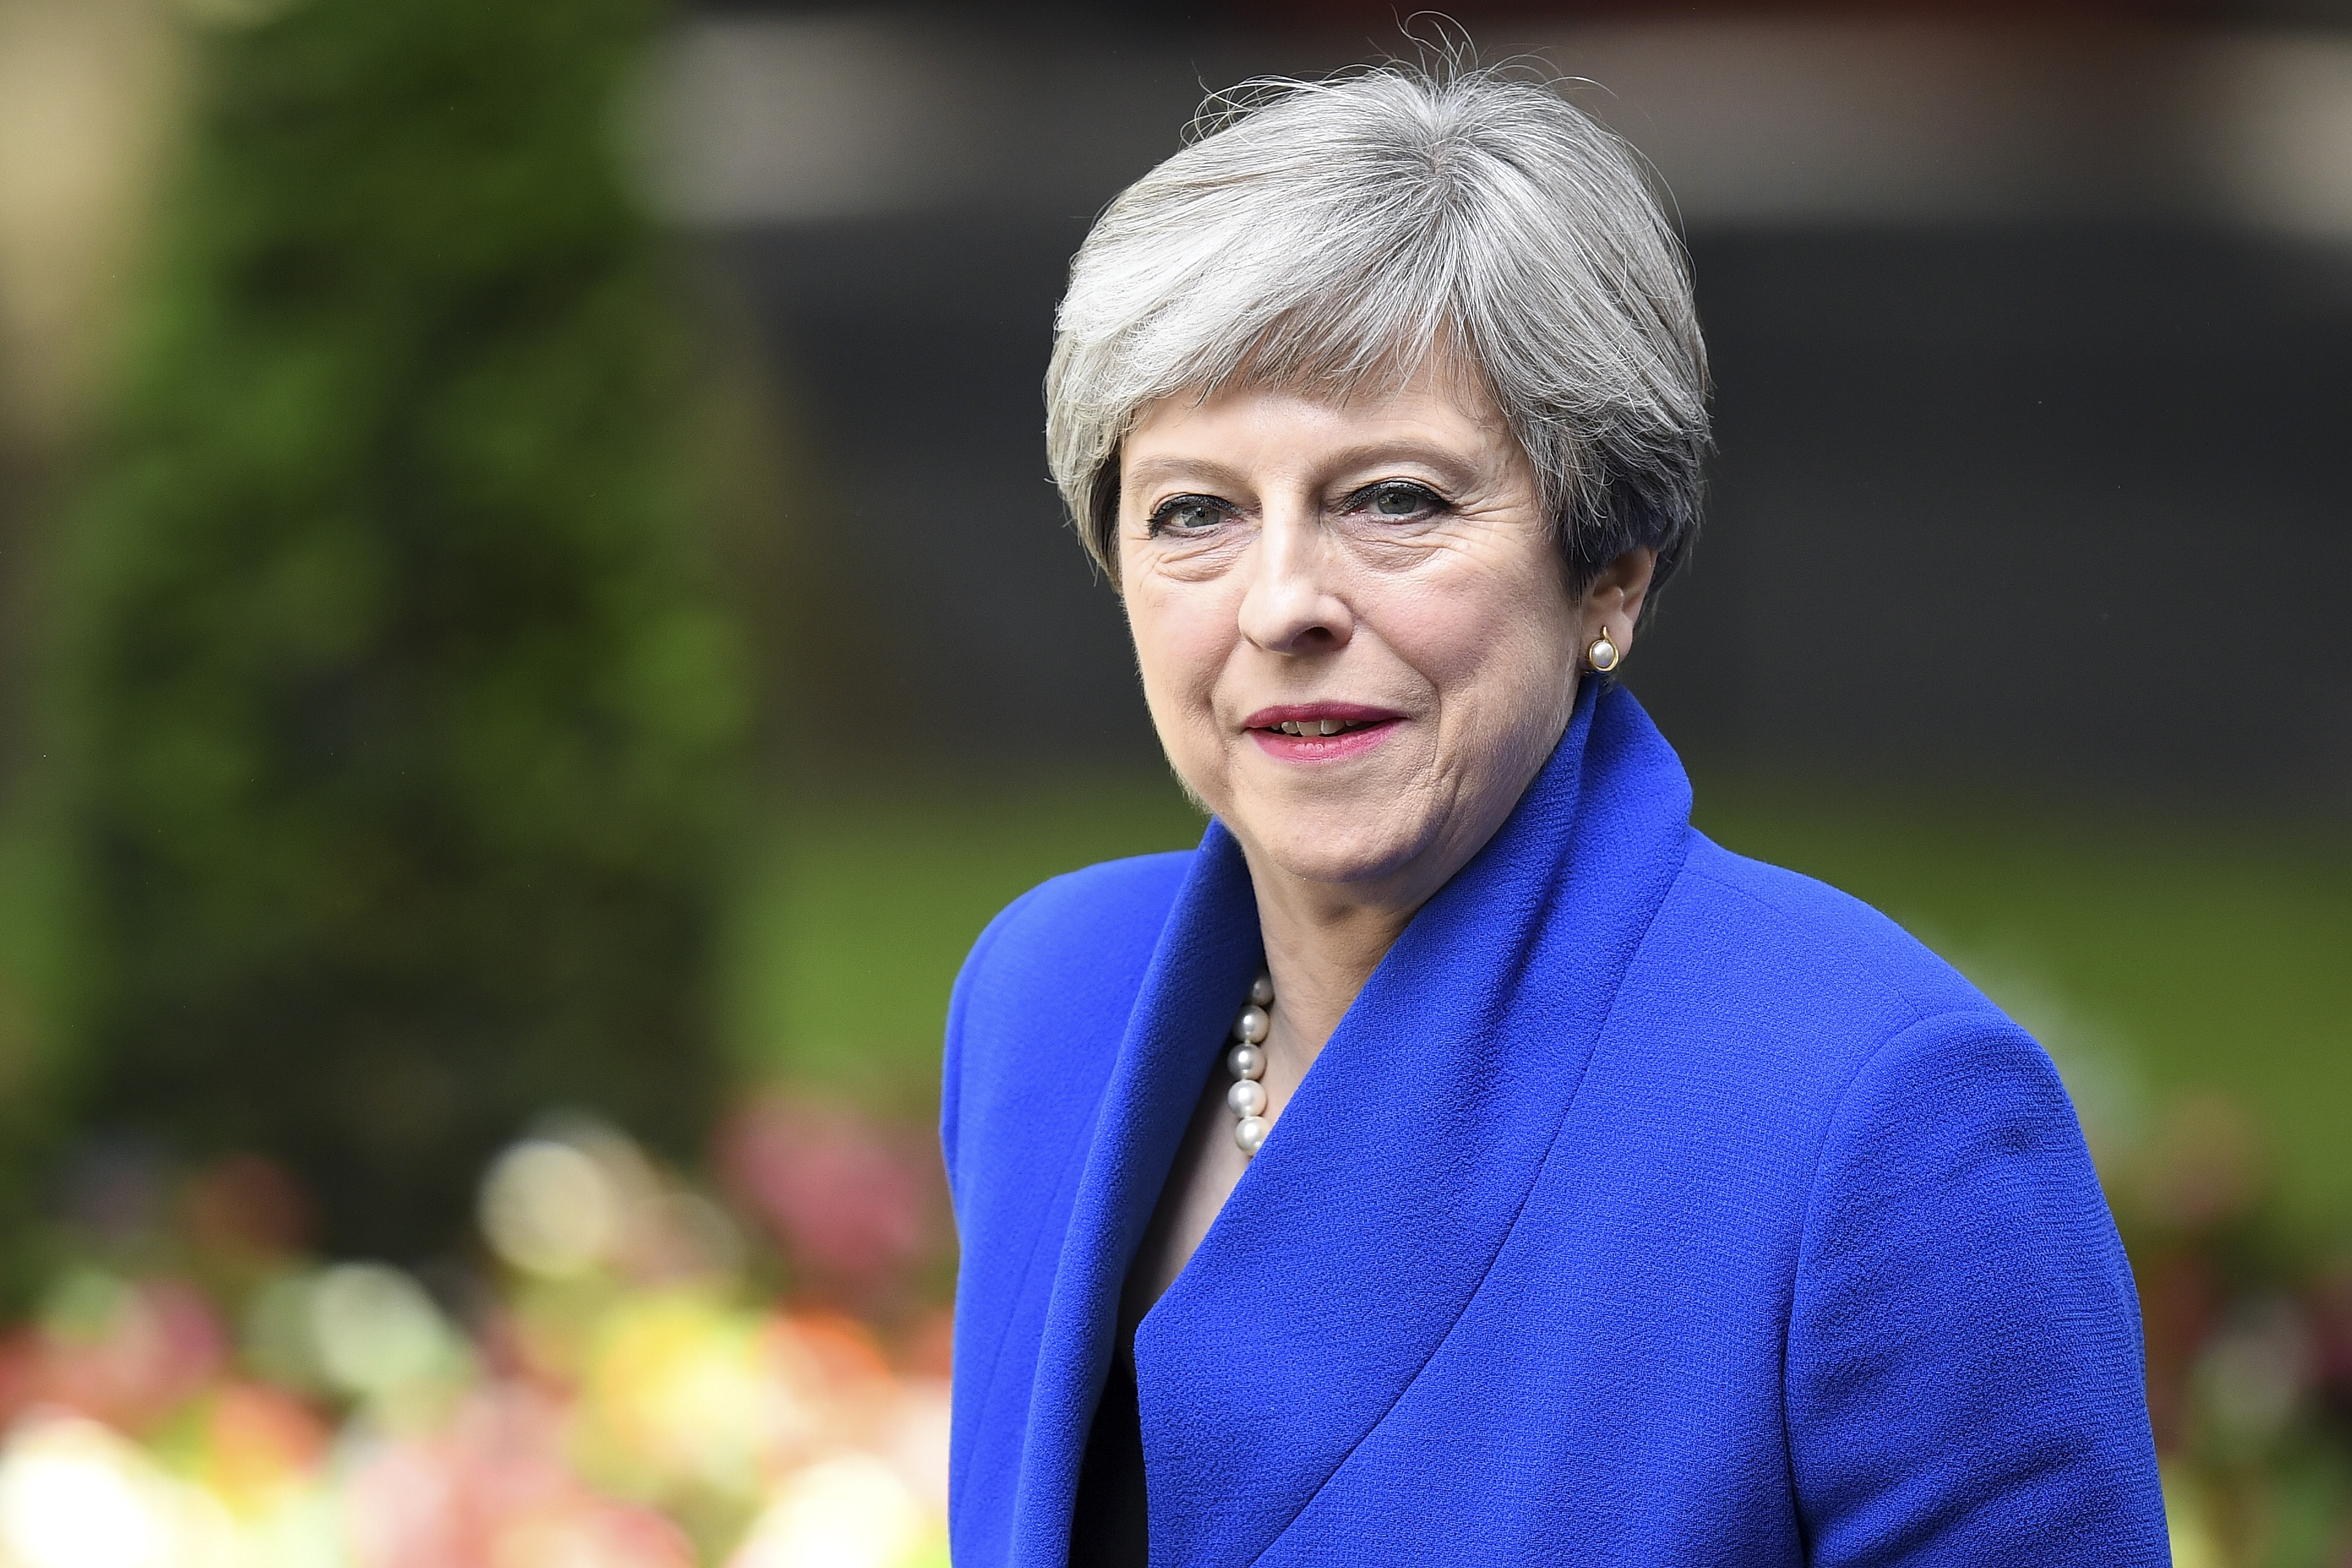 Theresa May is expected to officially resign as the UK's prime minister at Buckingham Palace on July 24.